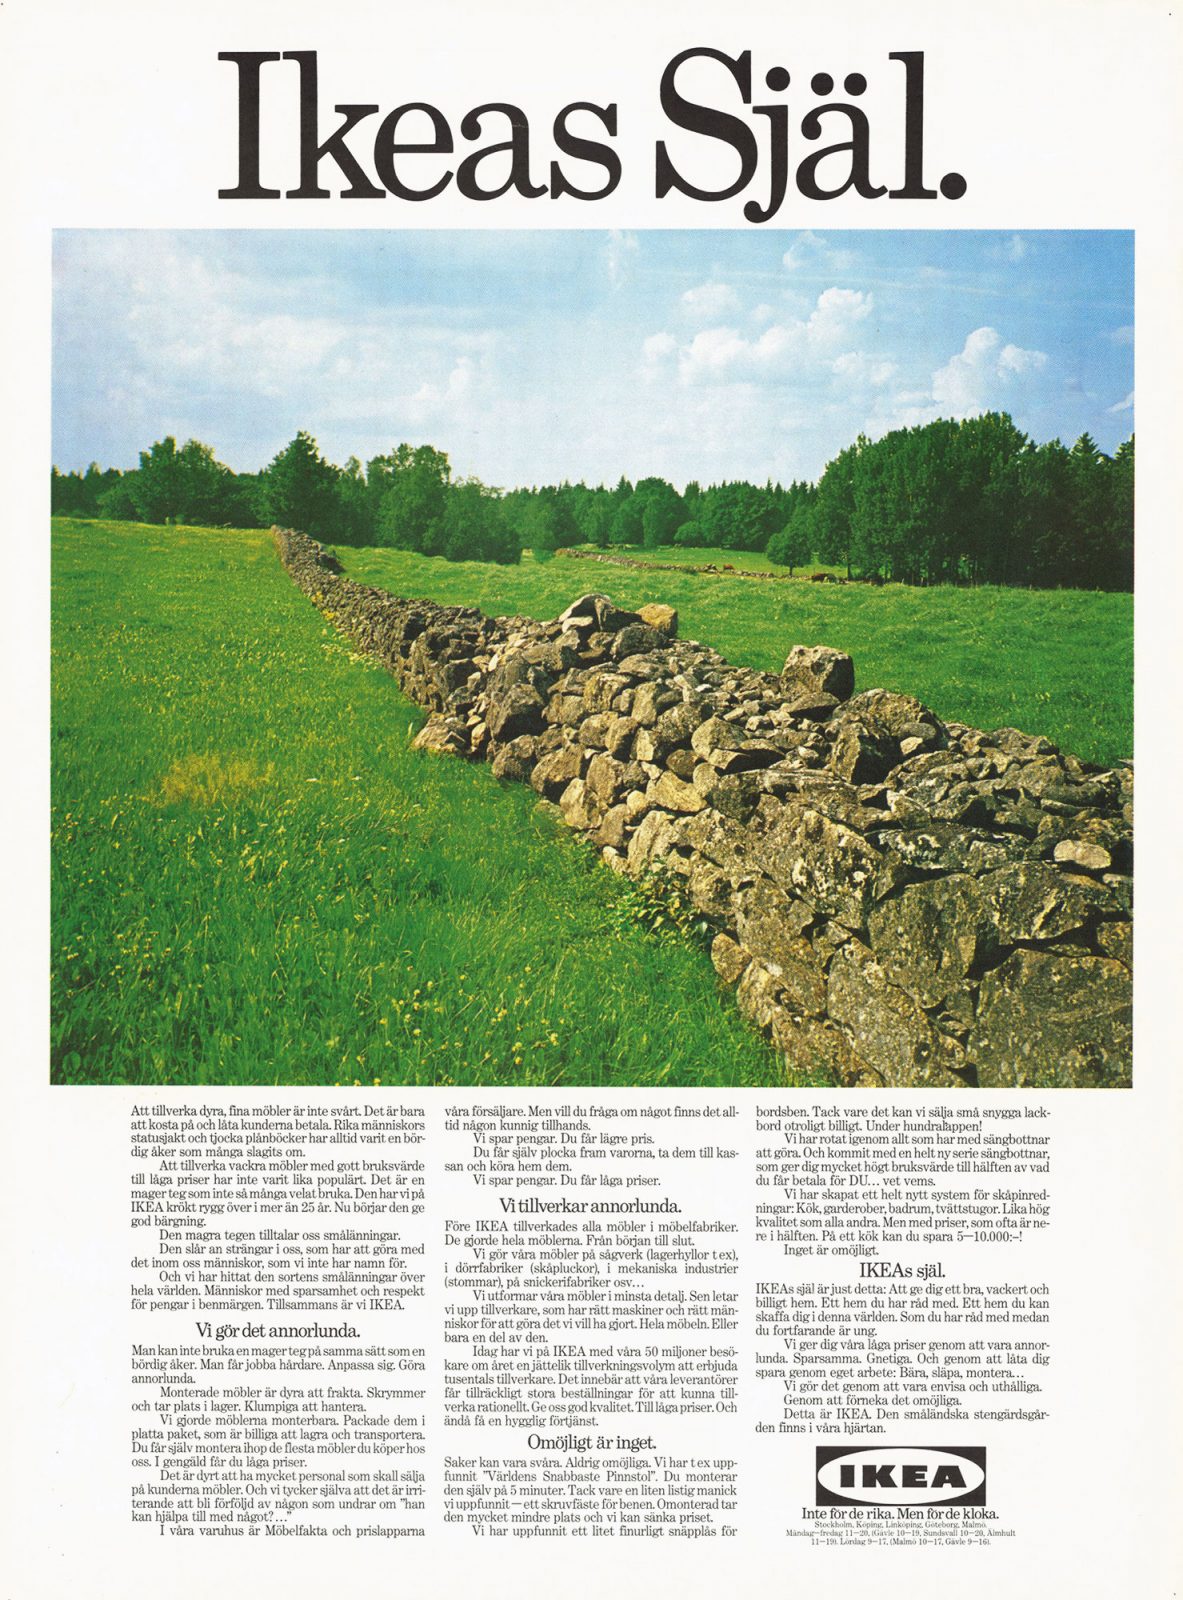 Whole page ad with photo of an older stone wall in Swedish landscape, headline IKEA’s soul and a long text.